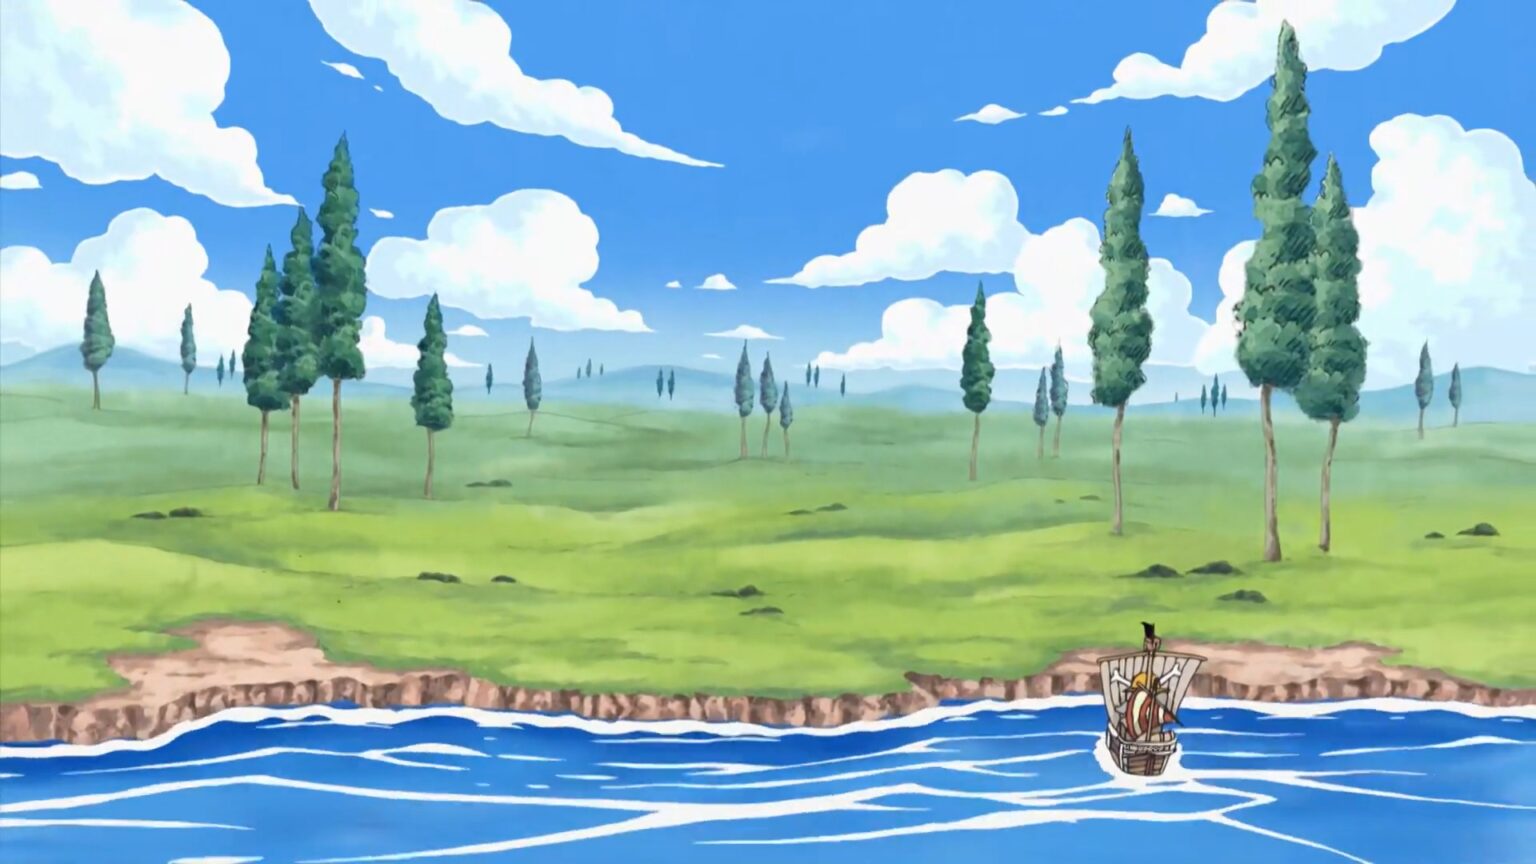 One Piece Episode 207 The Long Ring Long Land Arc Begins